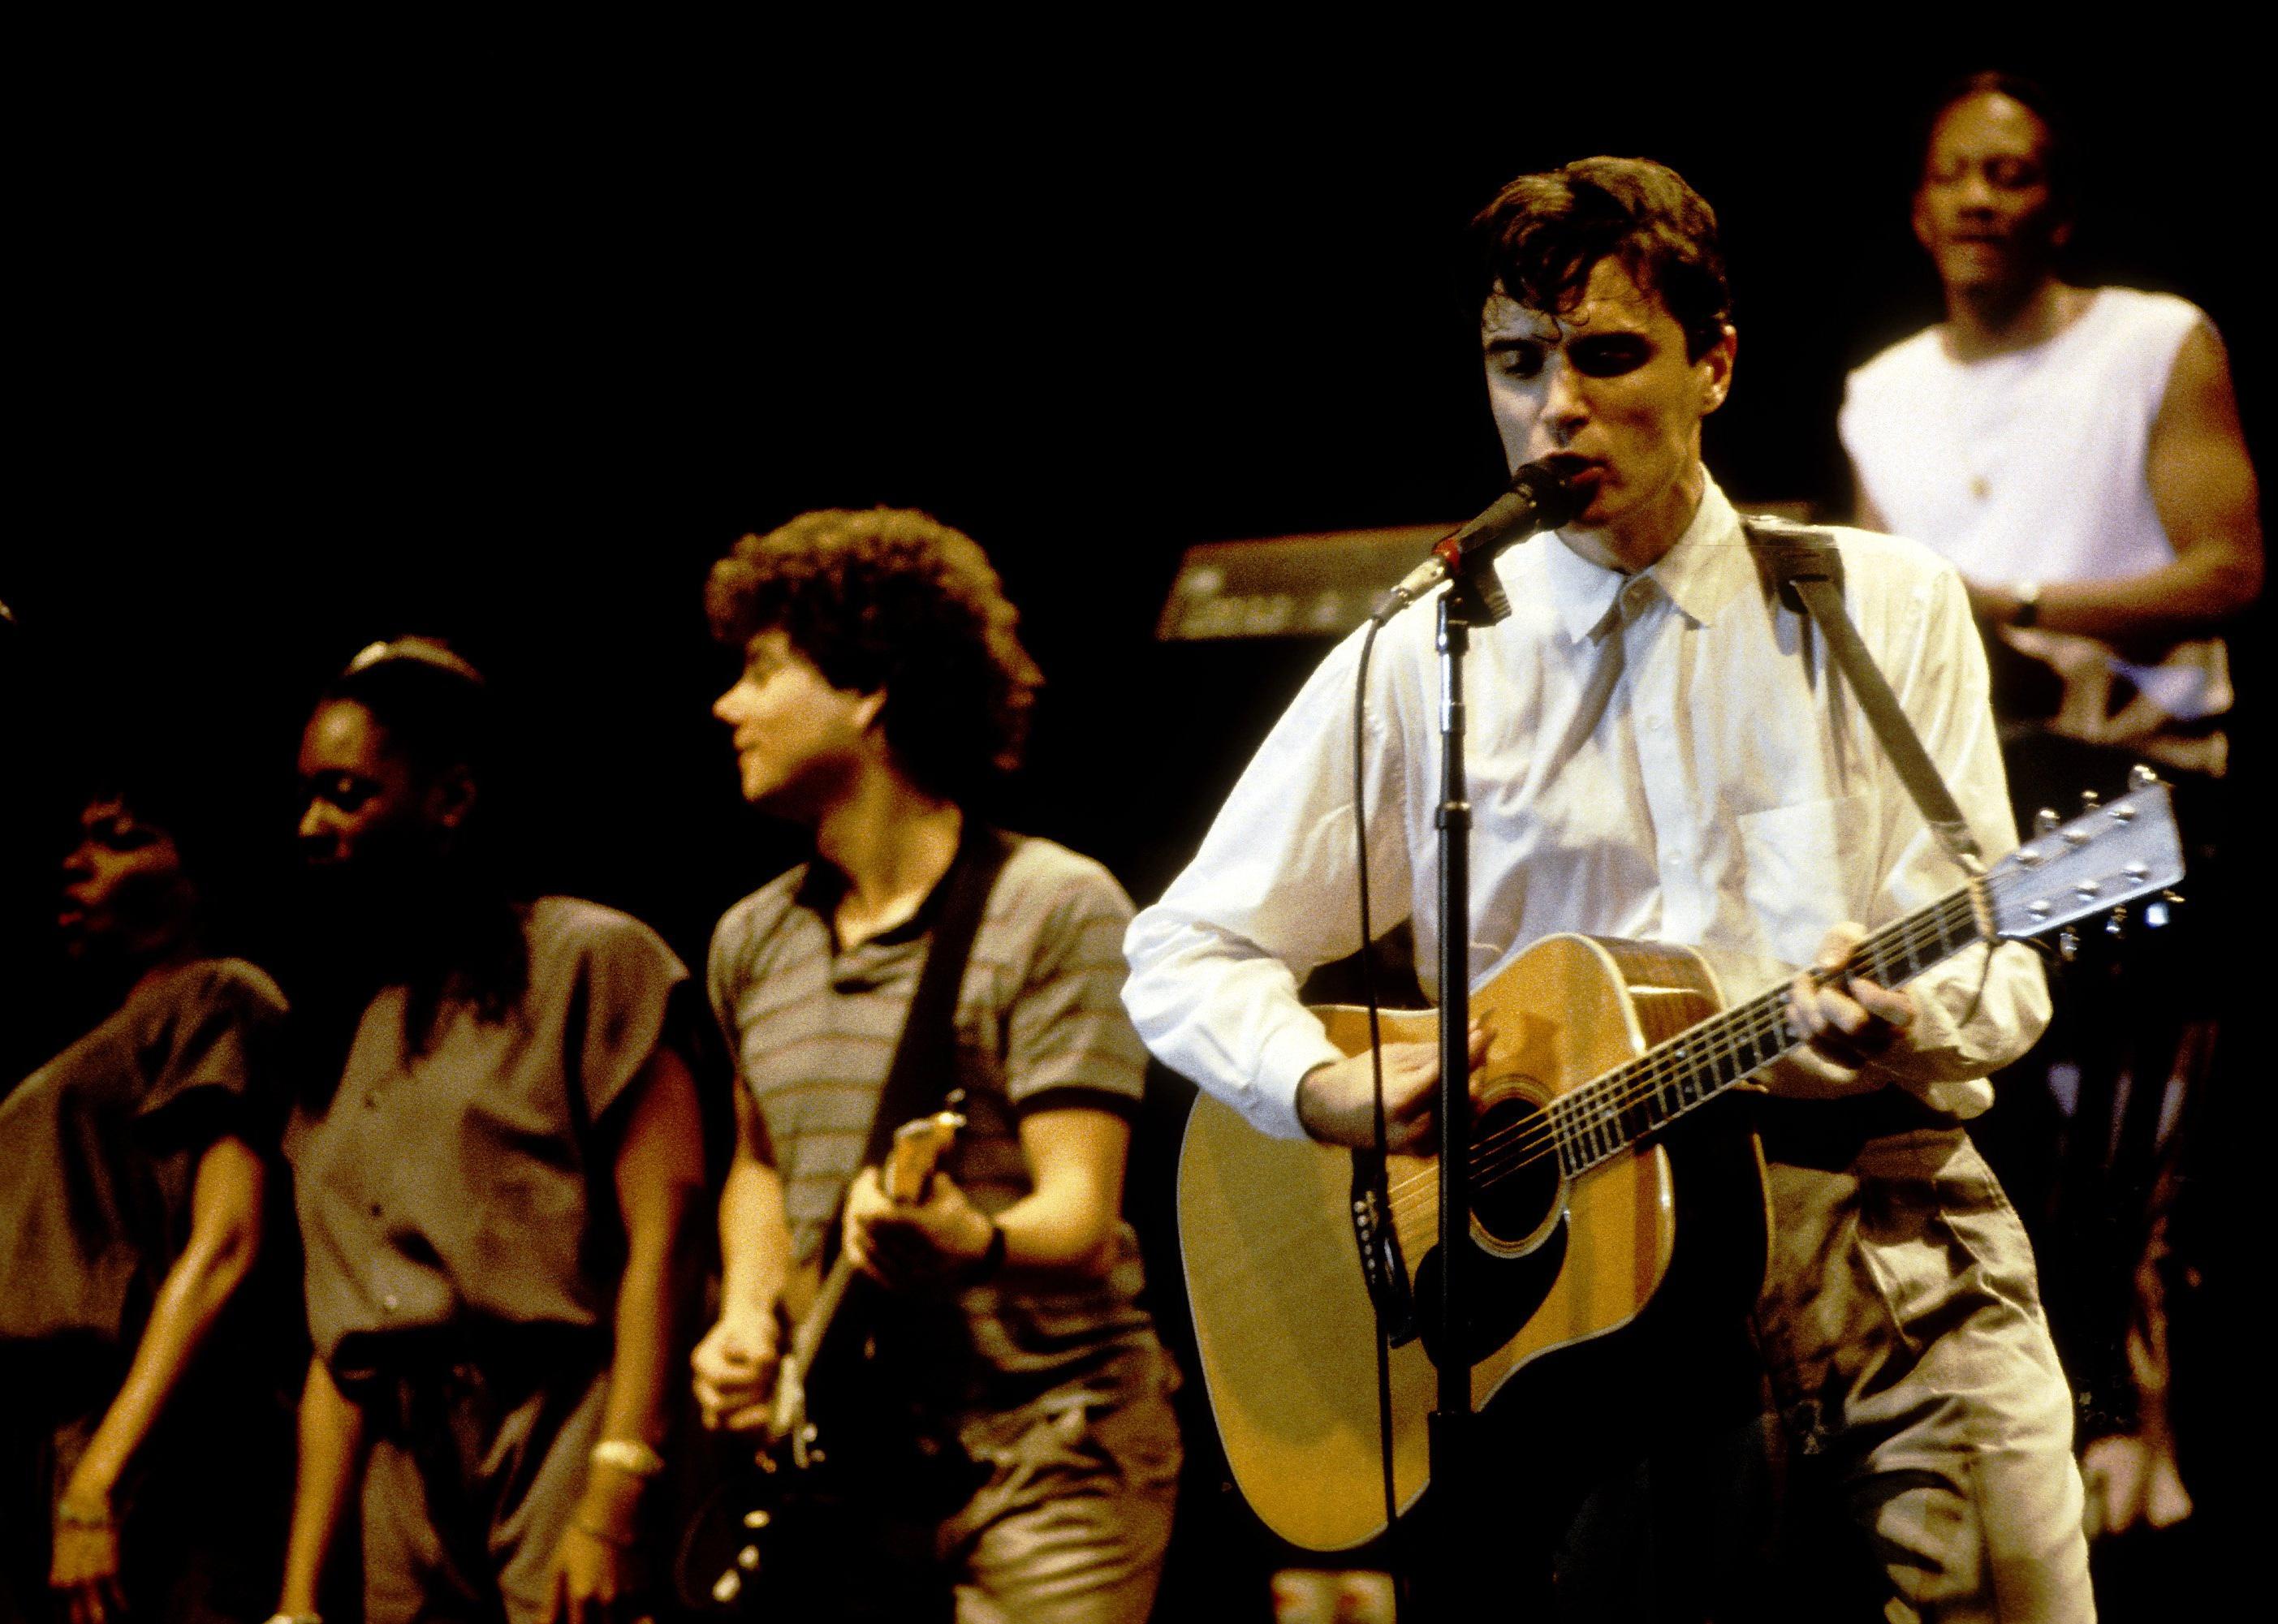 Jerry Harrison and David Byrne performs with 